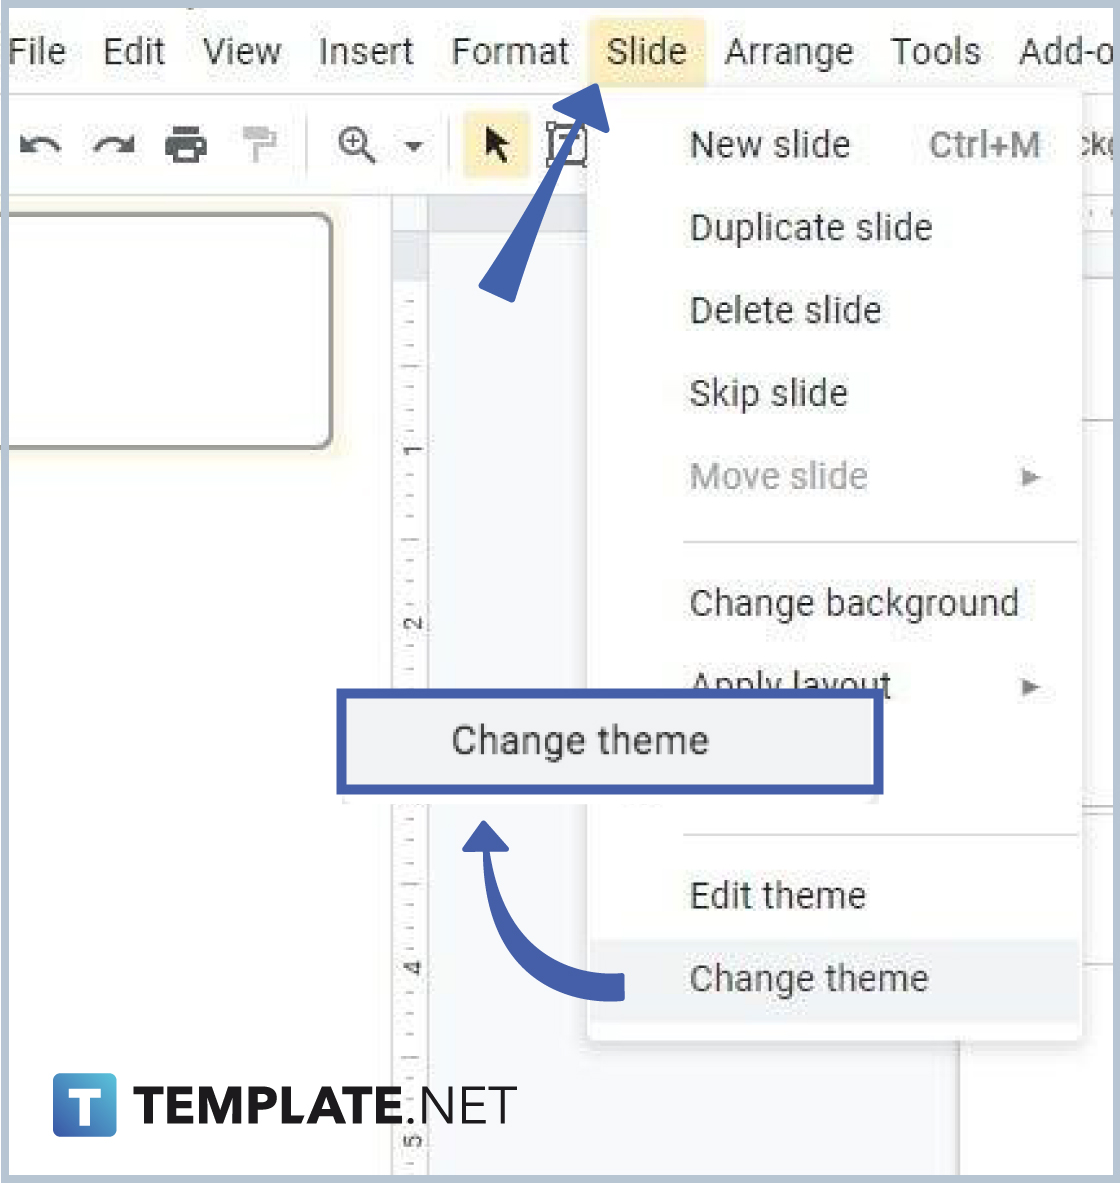 How To Add Import Themes To Google Slides